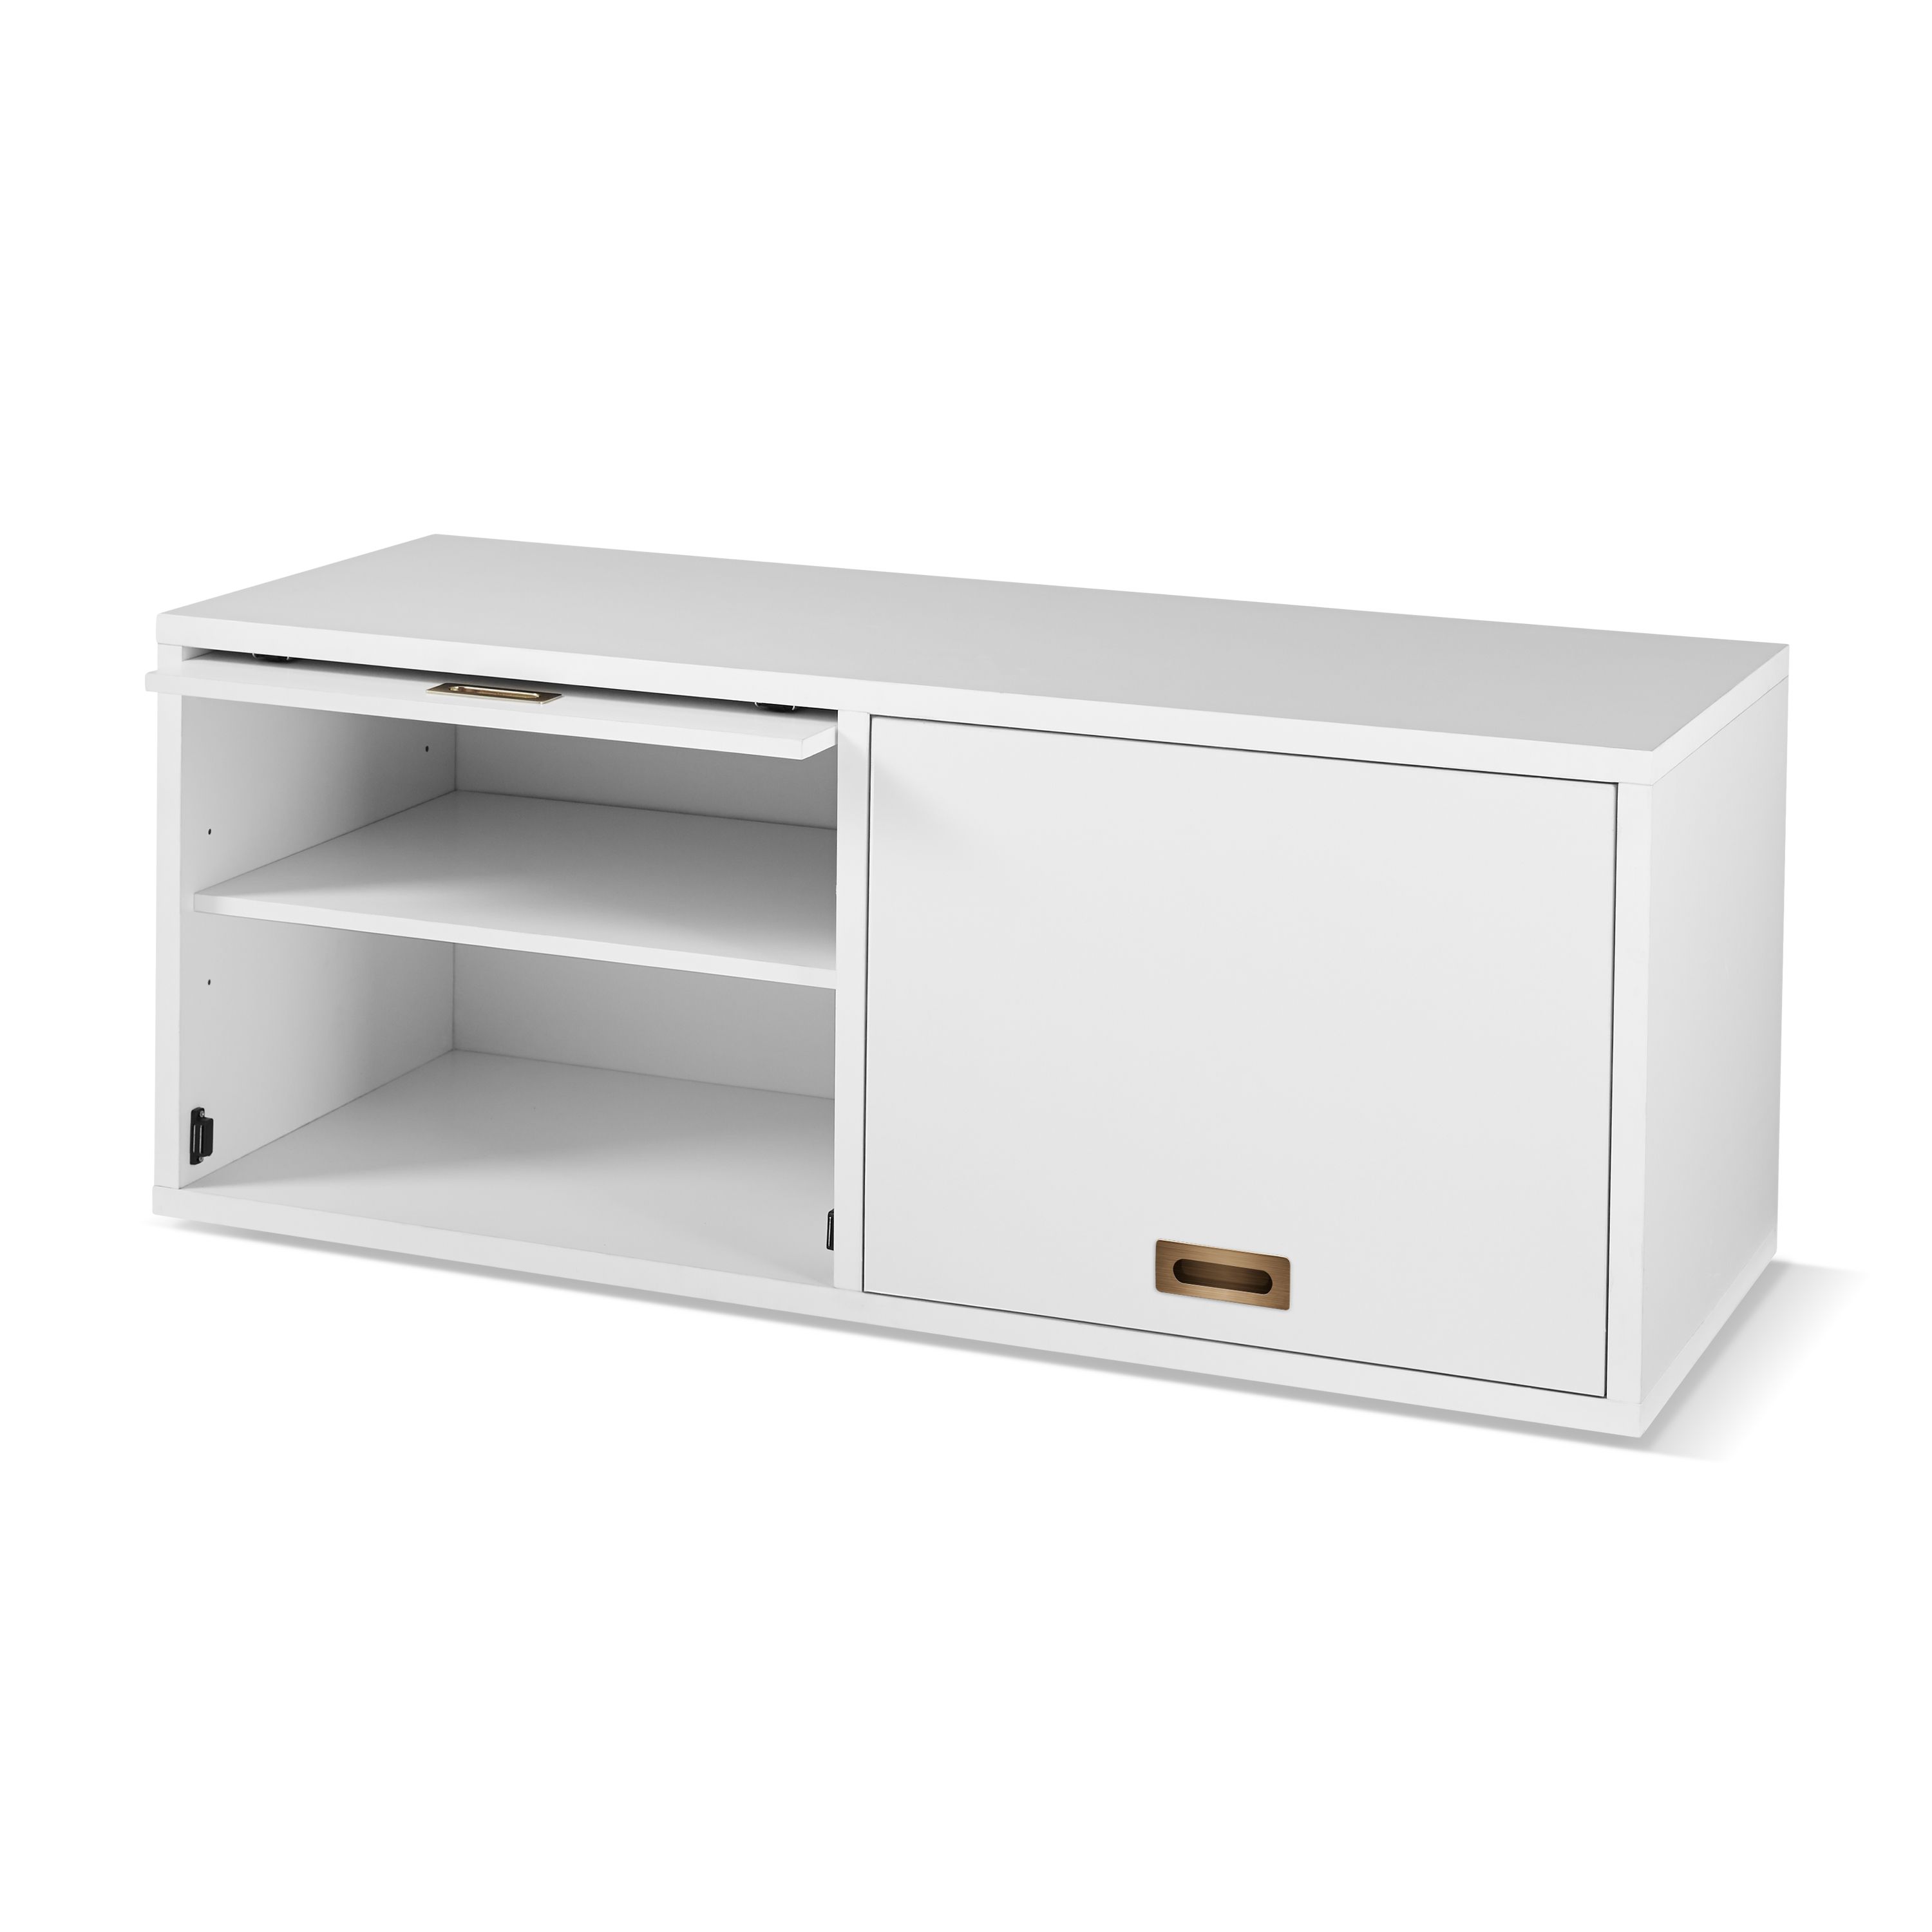 BRAND NEW Ludlow Storage Cabinet/ TV Stand for 55" TVs. WHITE